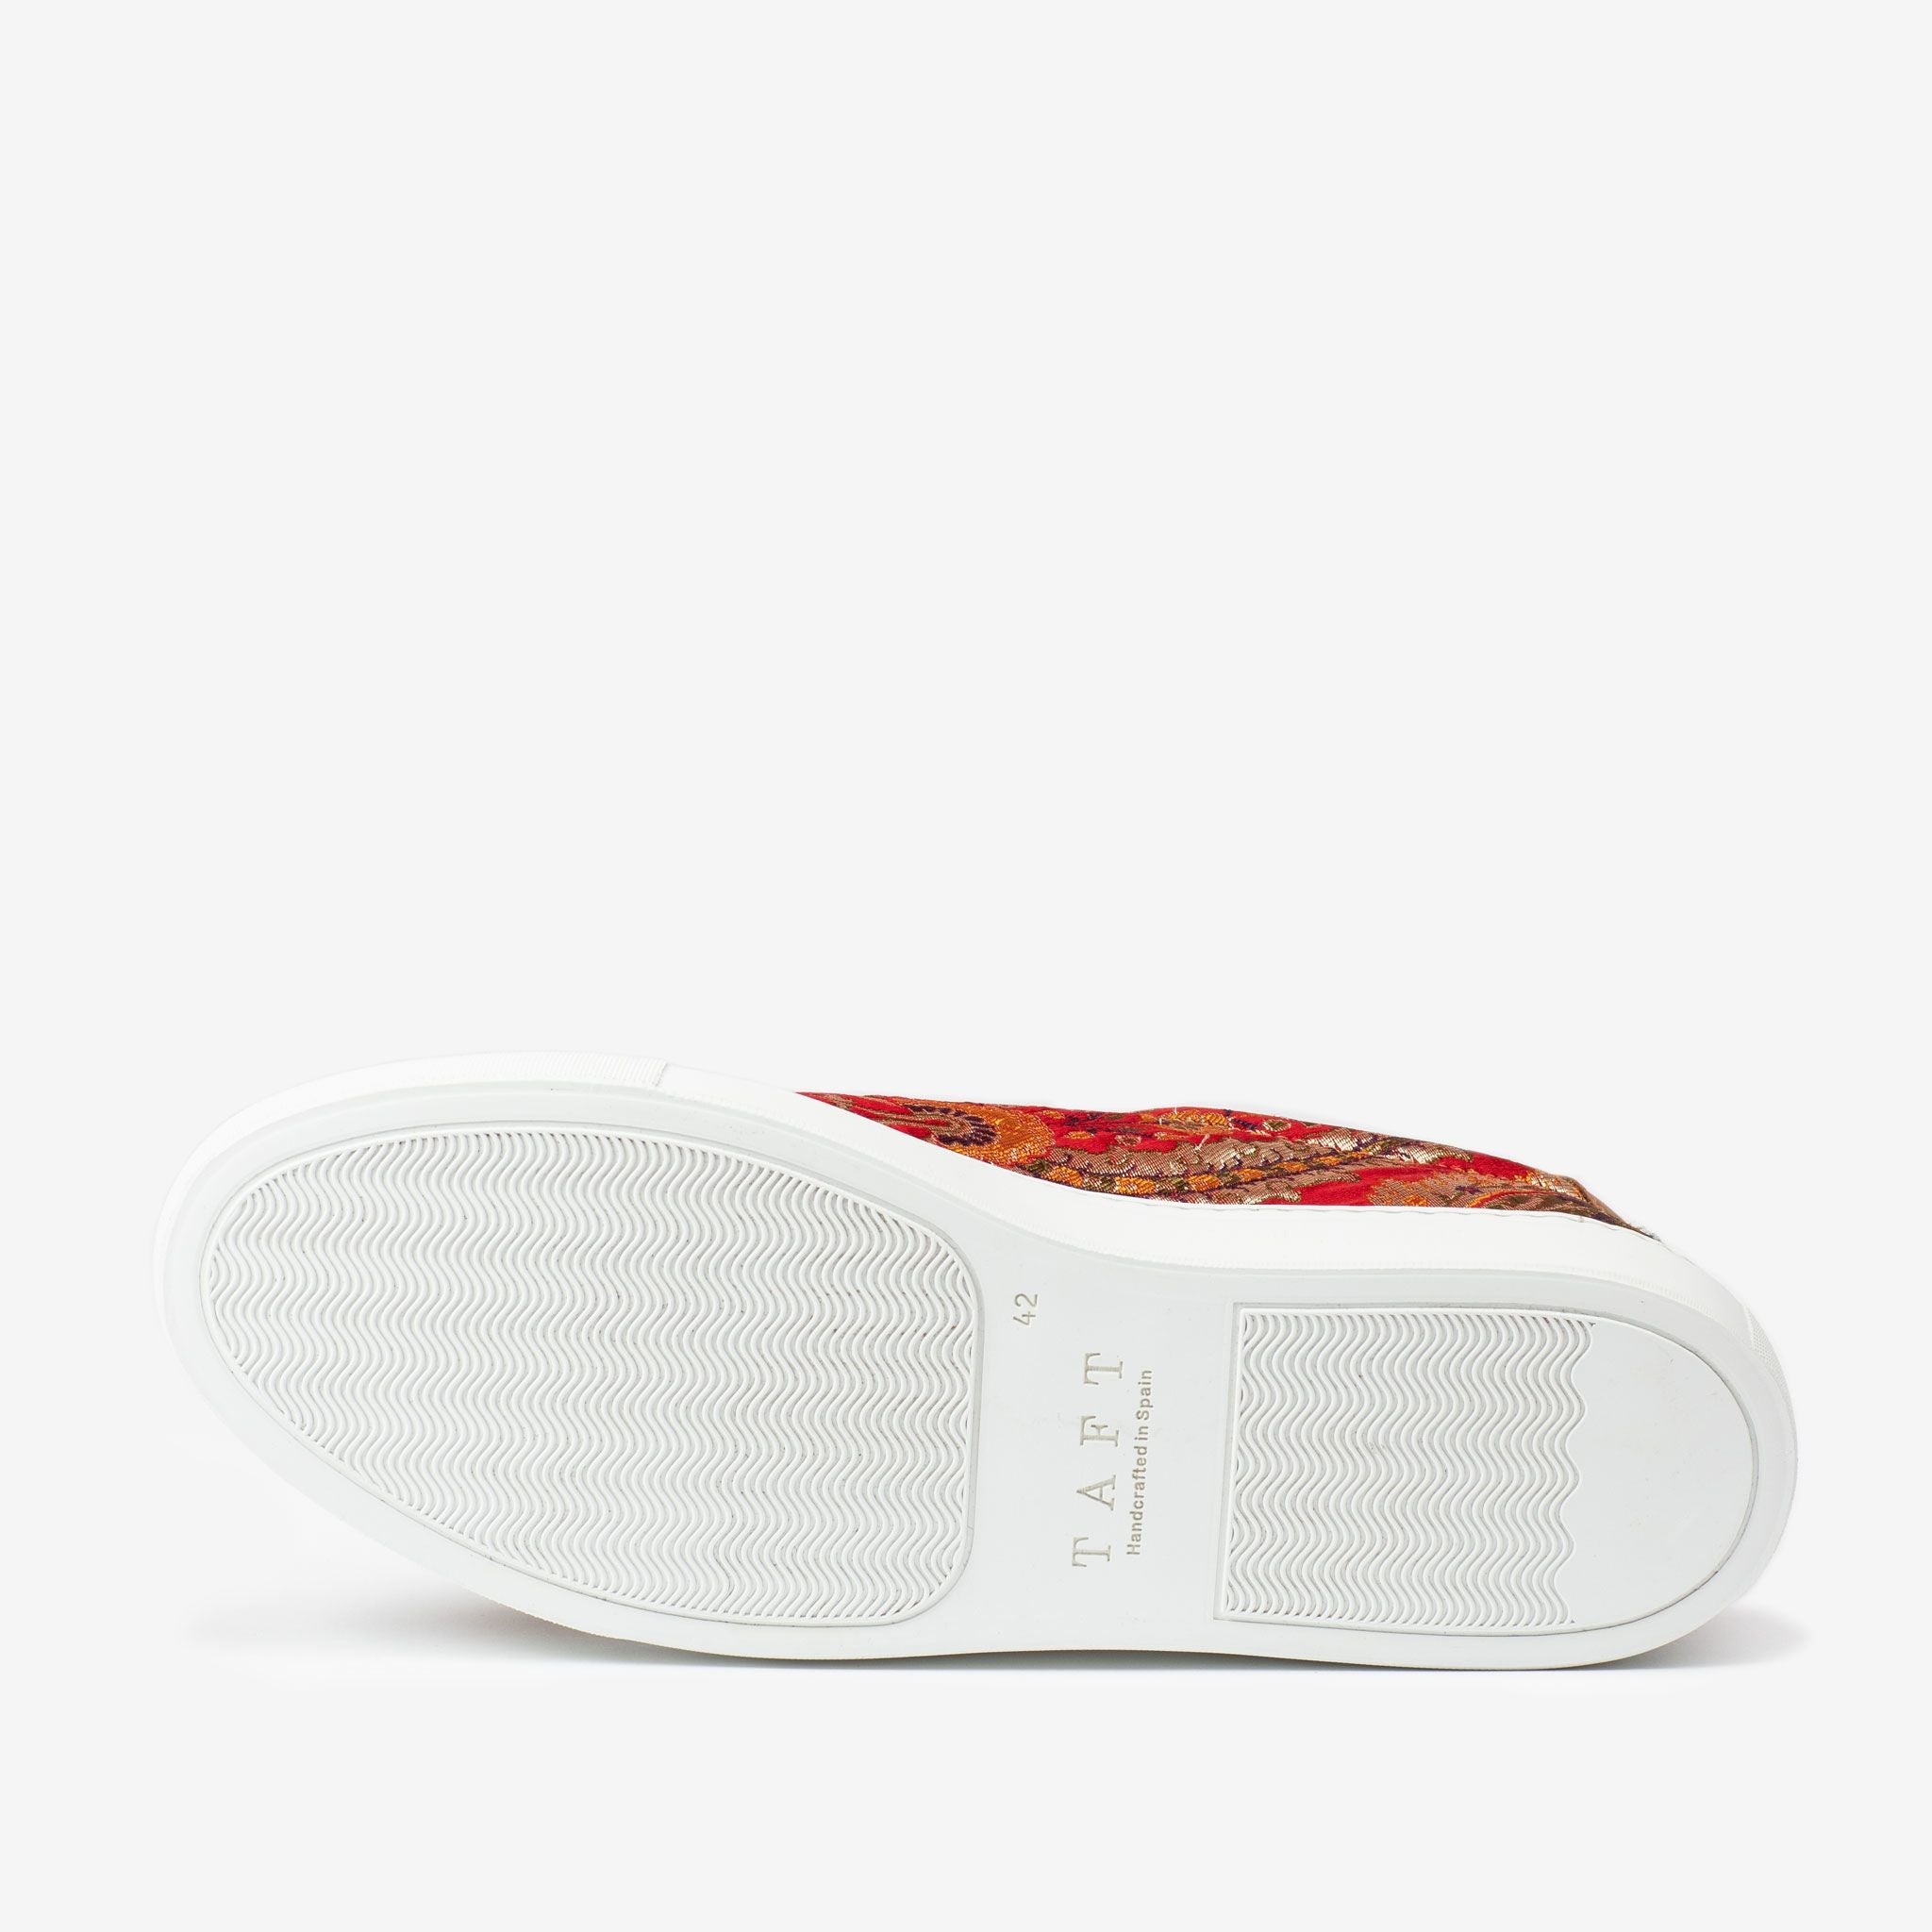 Zara Men's White Sneakers with Red Patch and Zipper